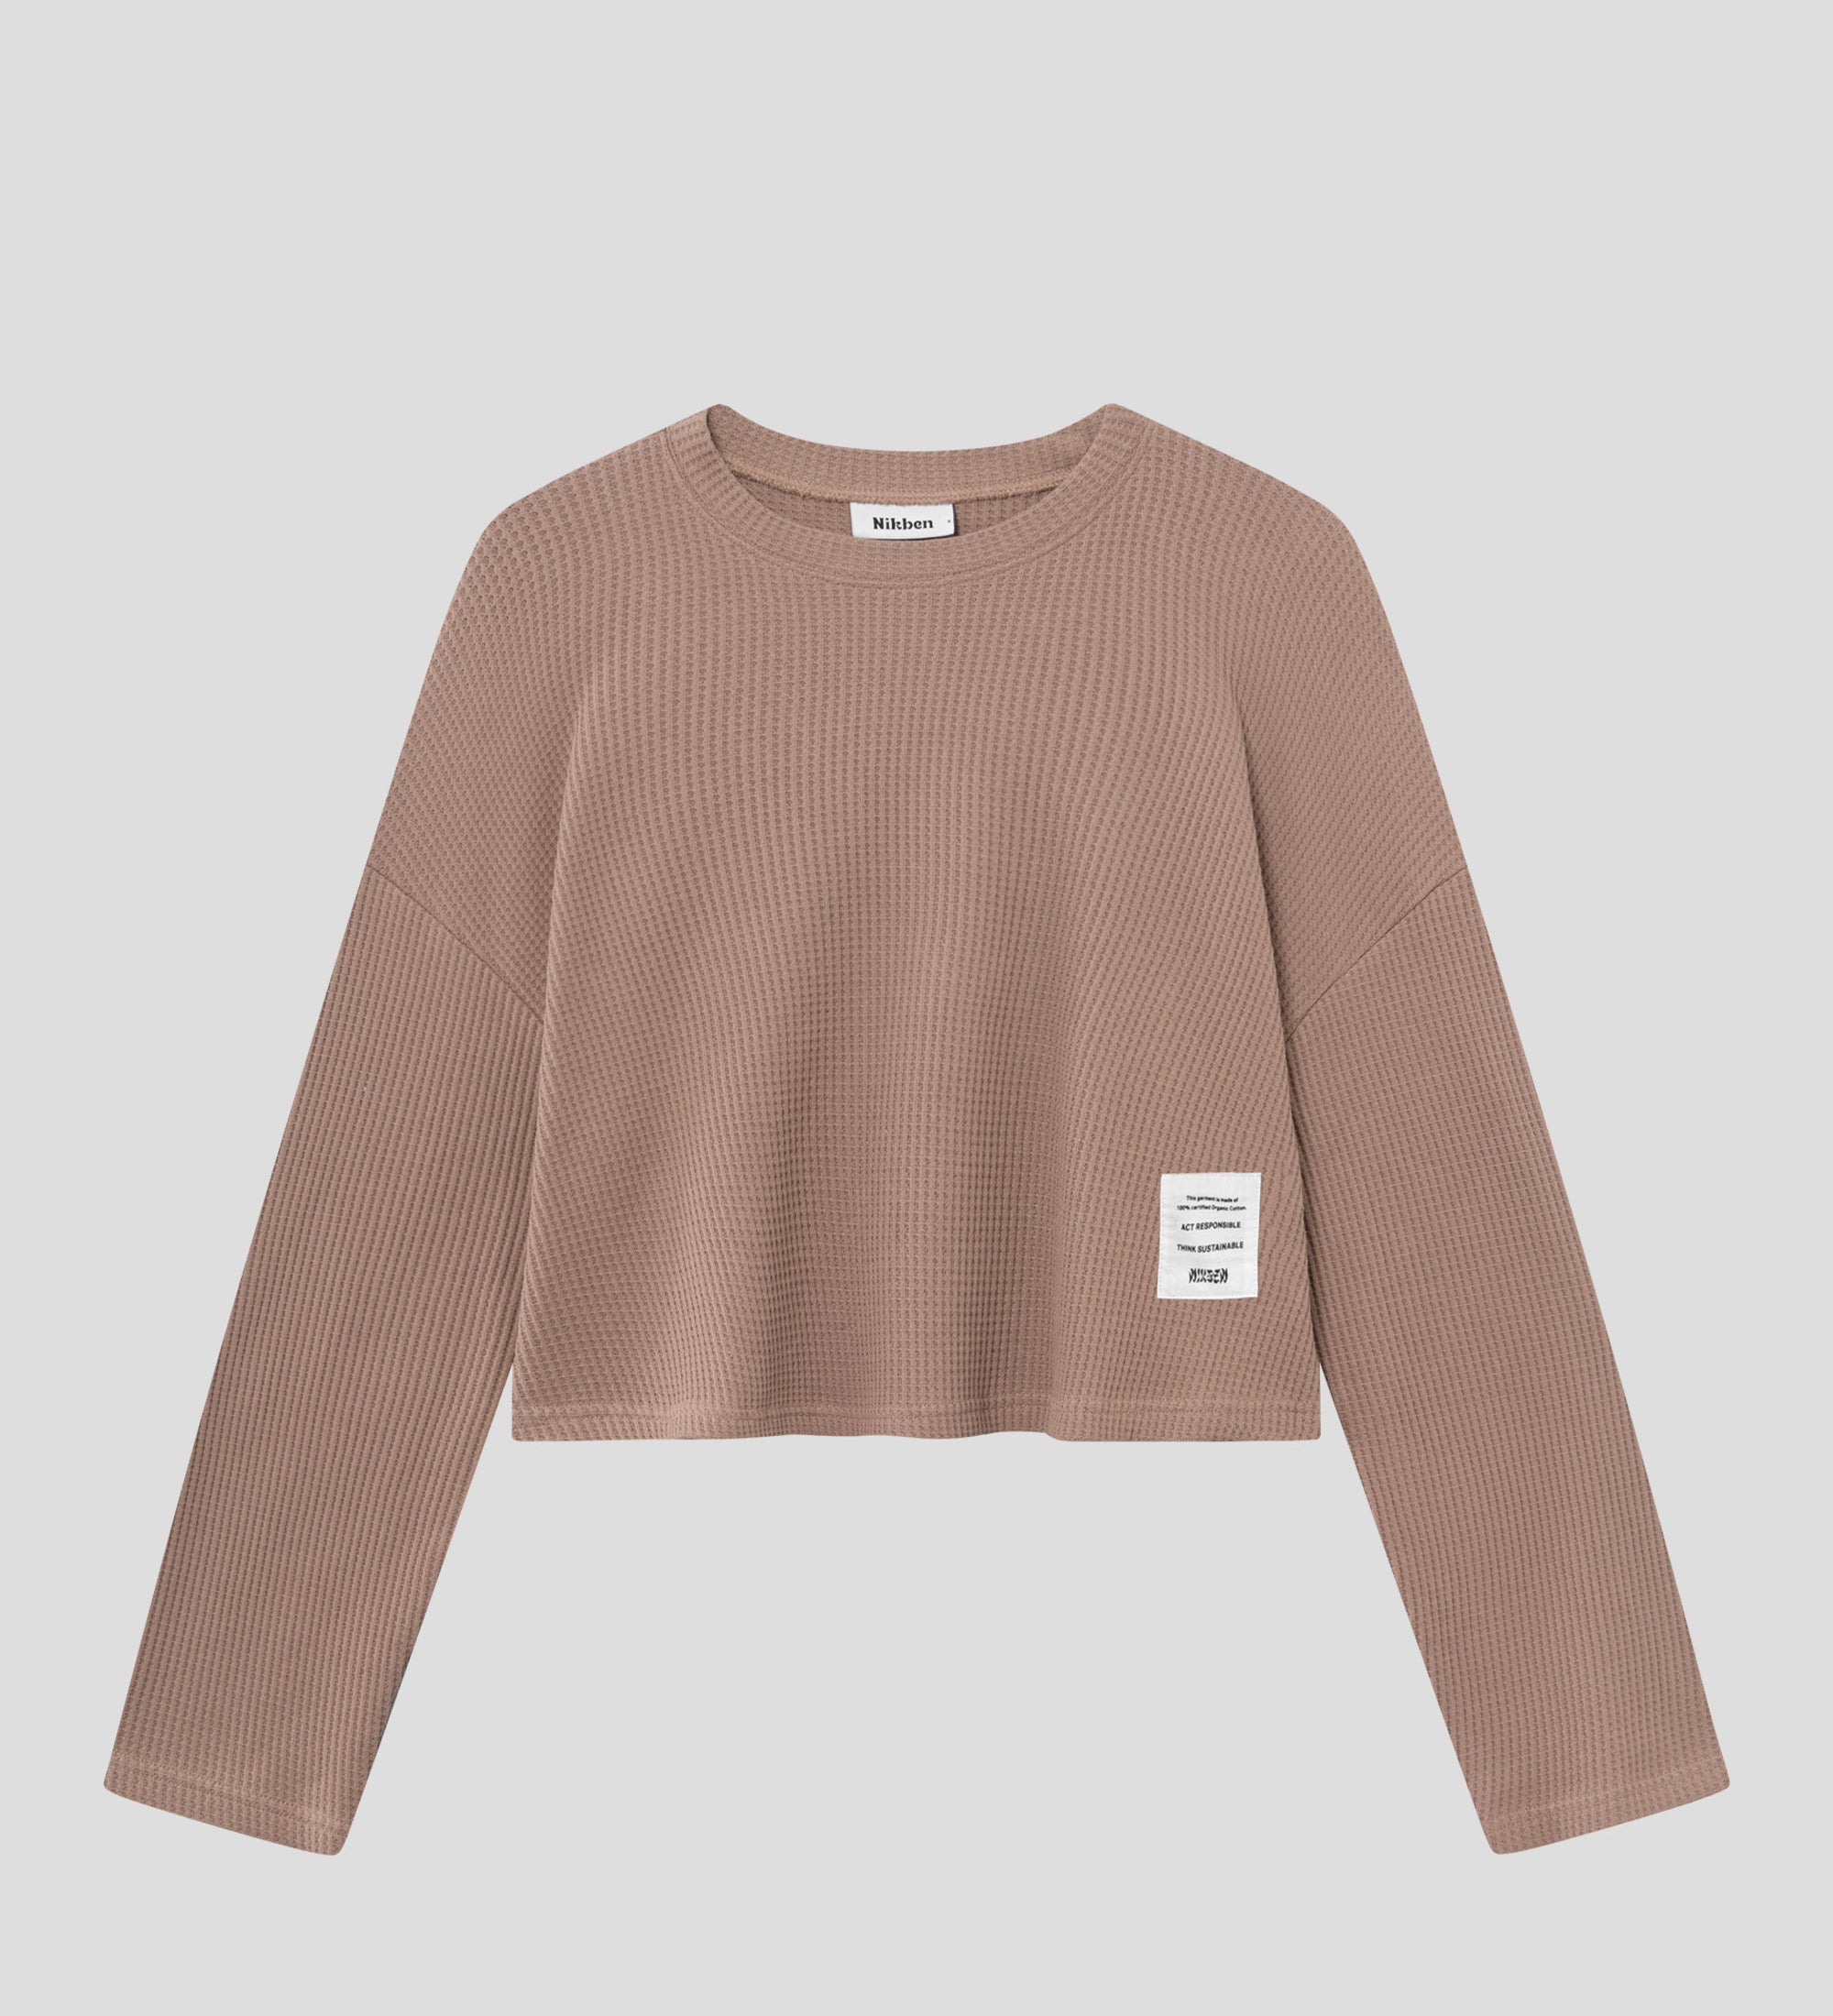 Brown waffle-patterned cropped sweatshirt with a stitched-on material label.